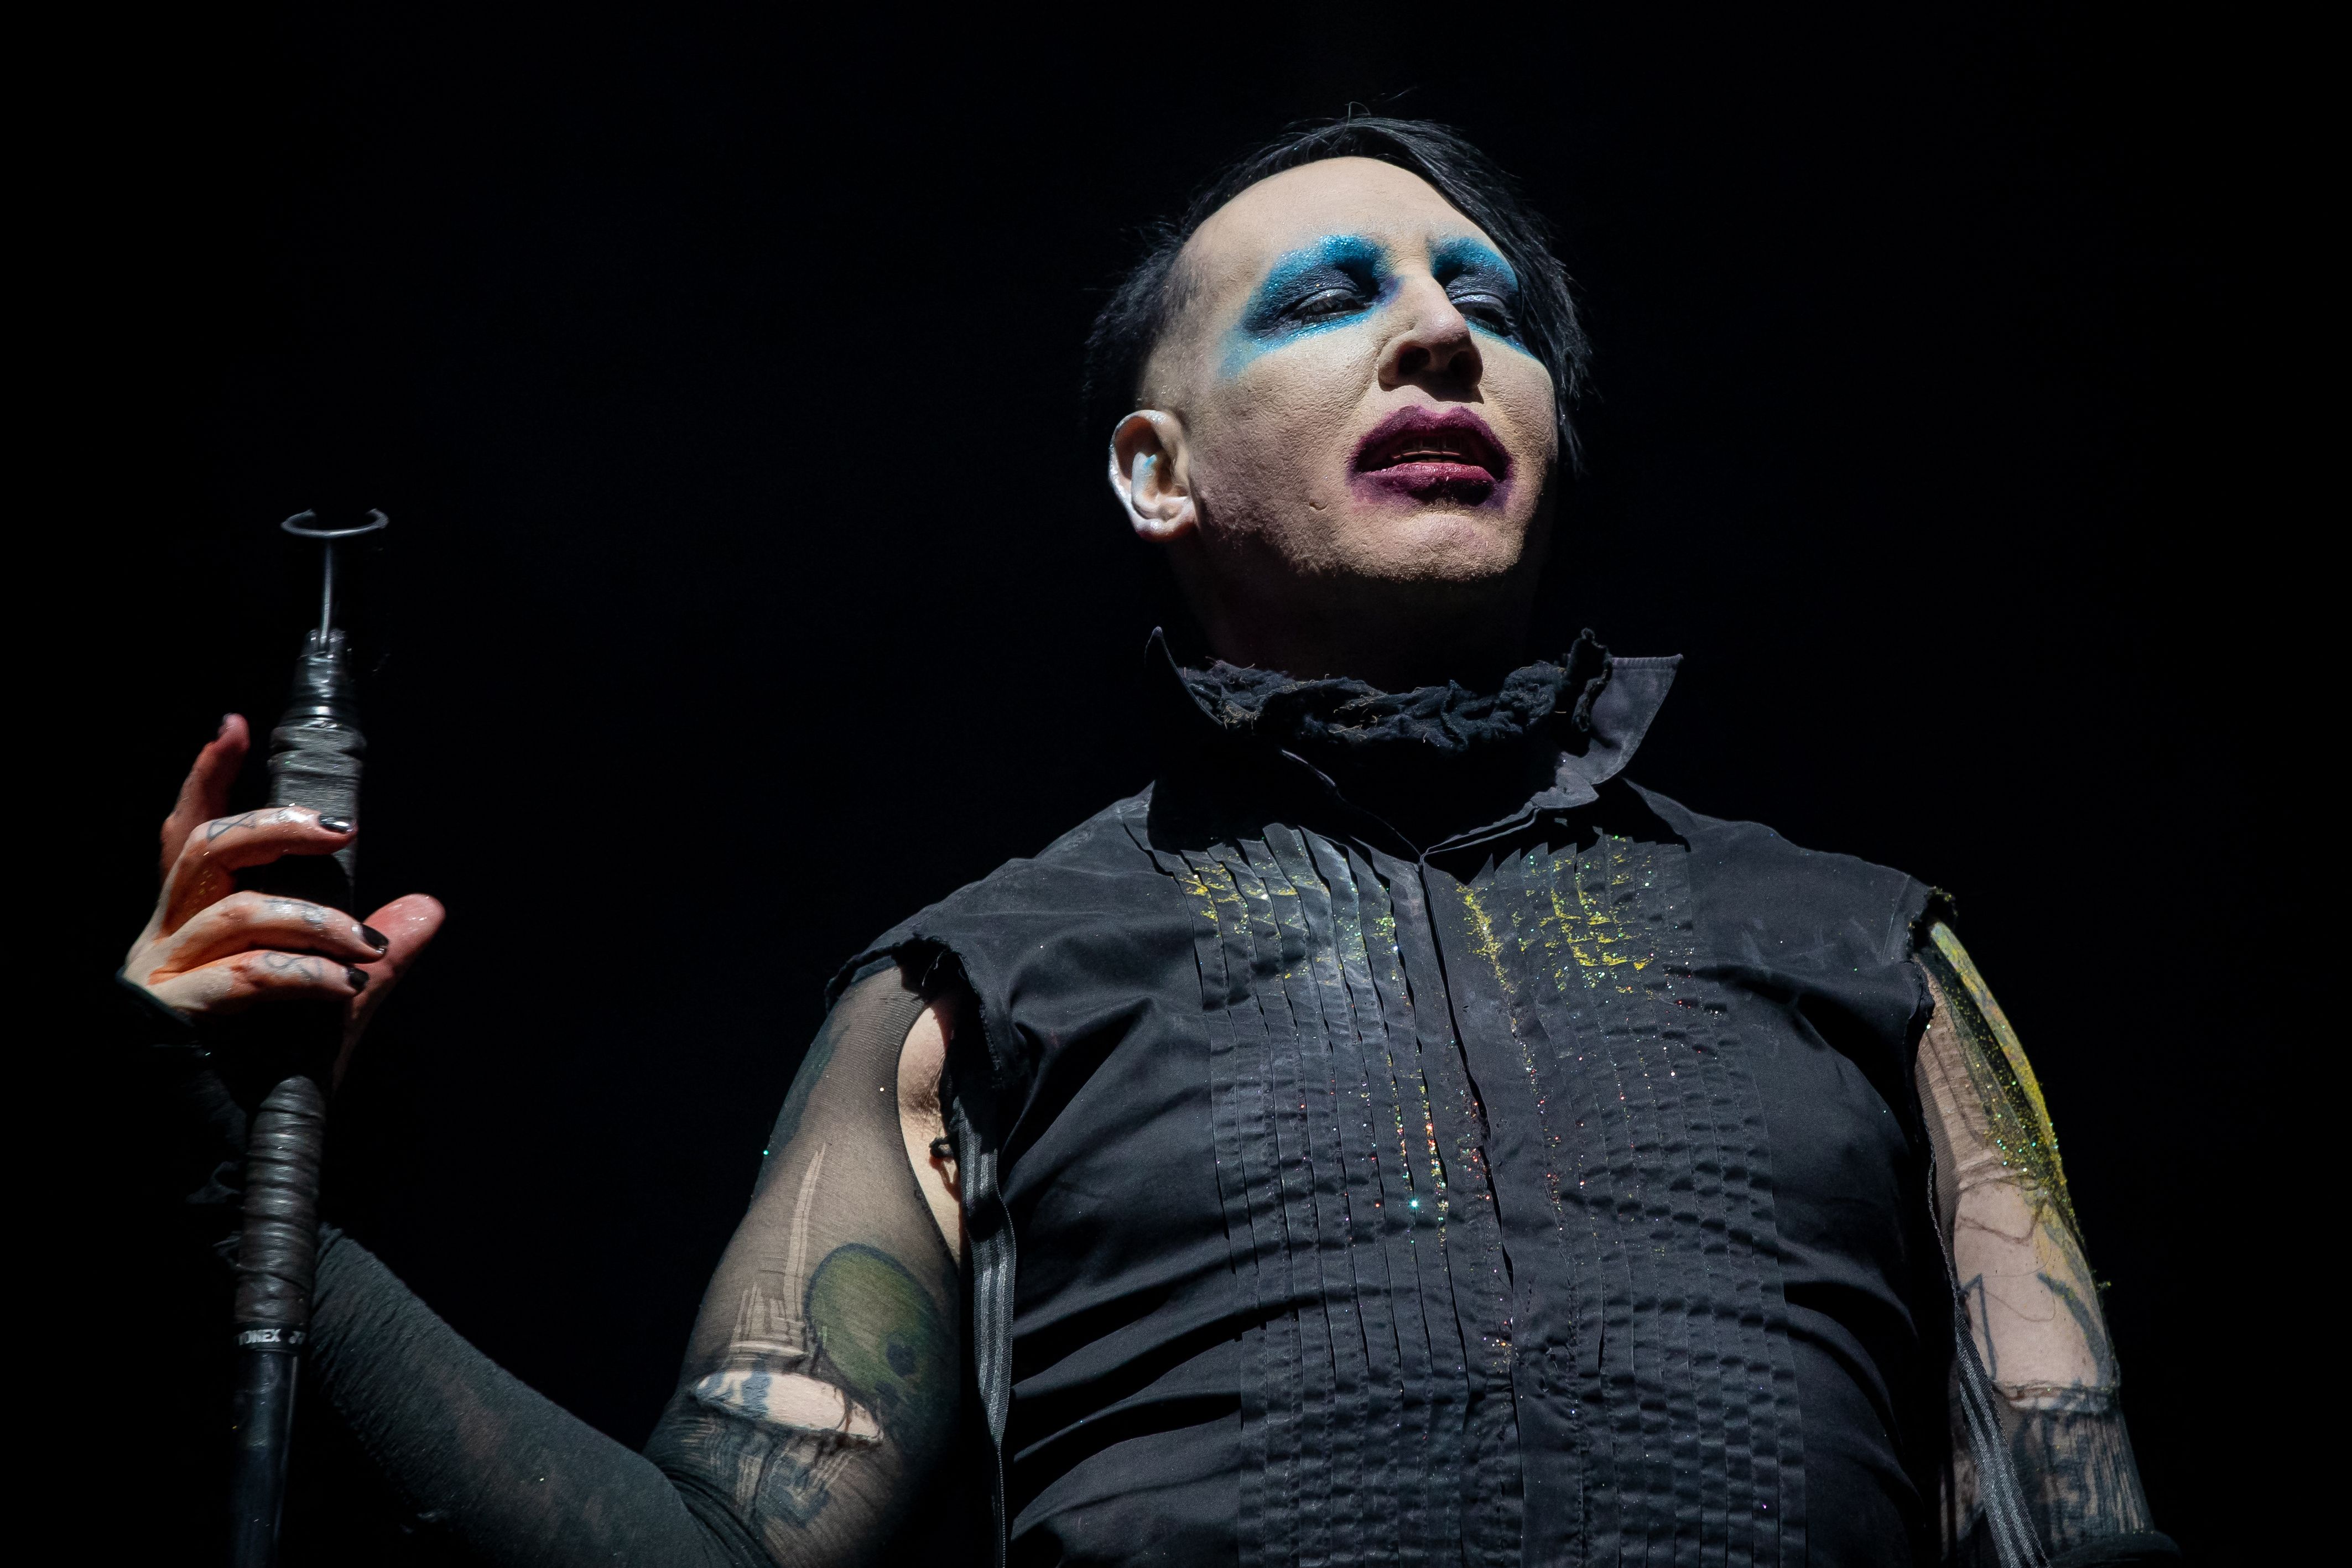 1626198470 658 Marilyn Manson what happened at a concert and what was